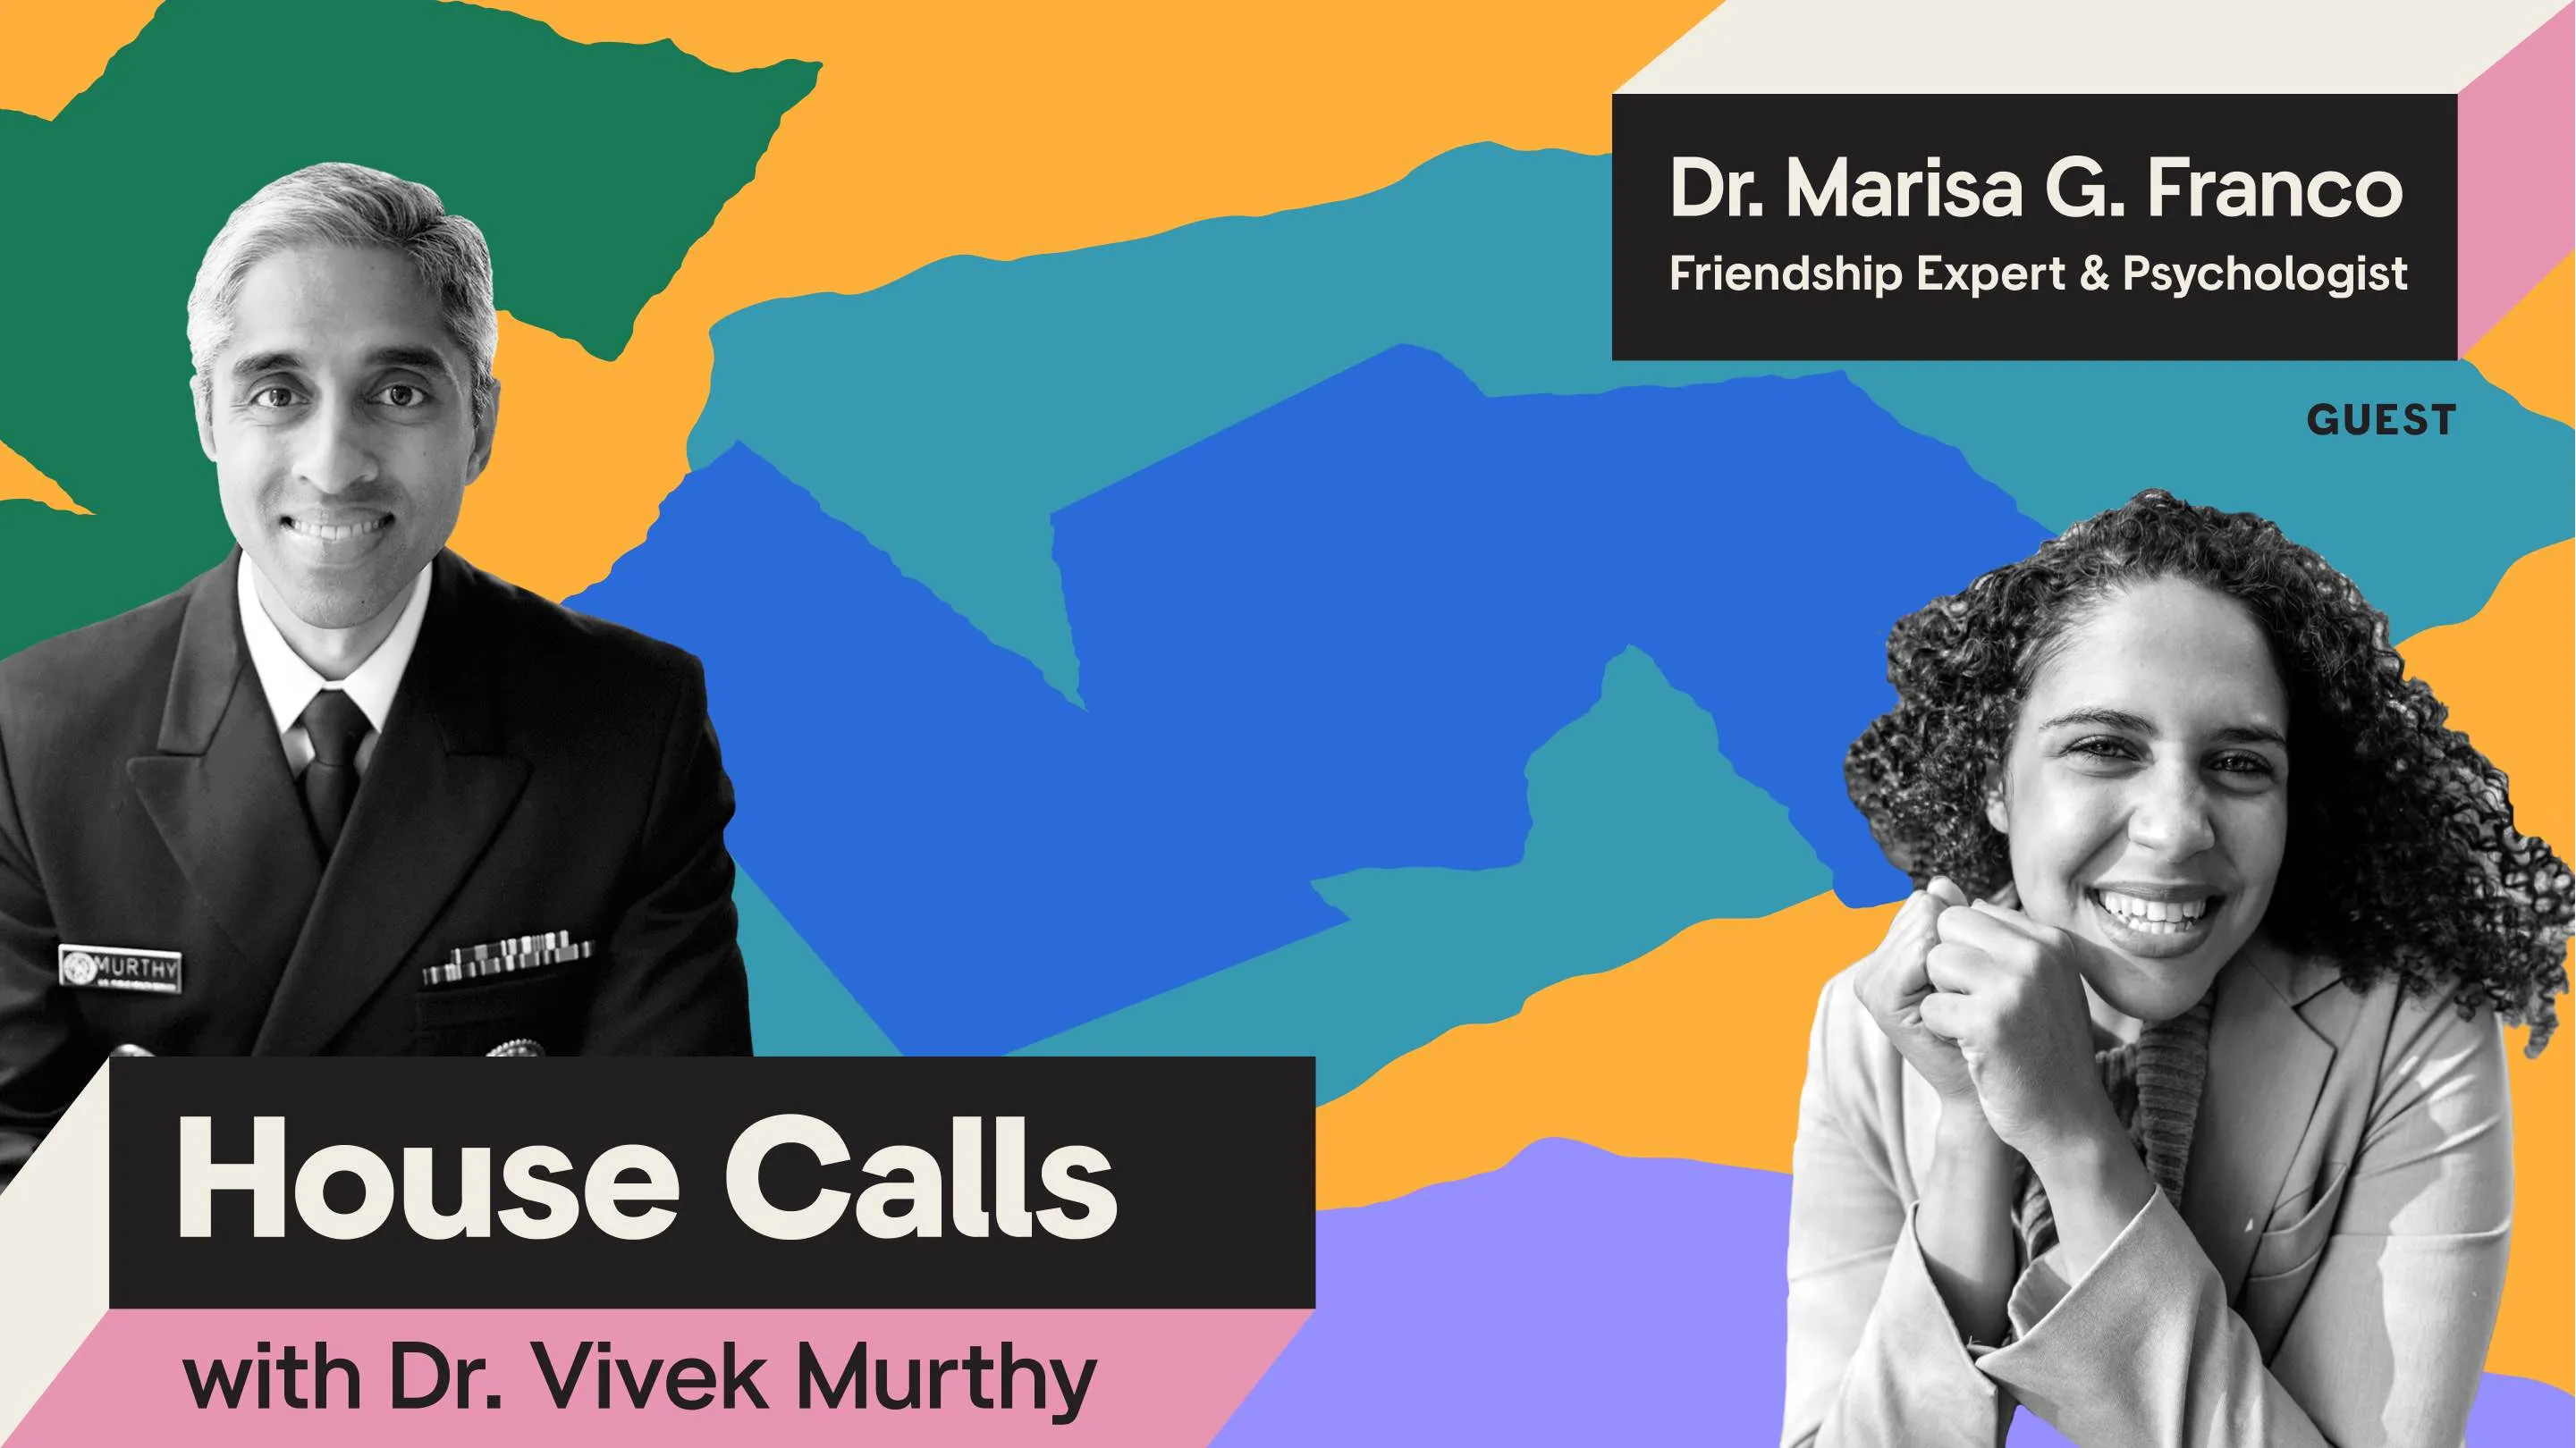 Black and white portraits of Surgeon General Vivek Murthy and Dr. Marisa G. Franco with a colorful background.